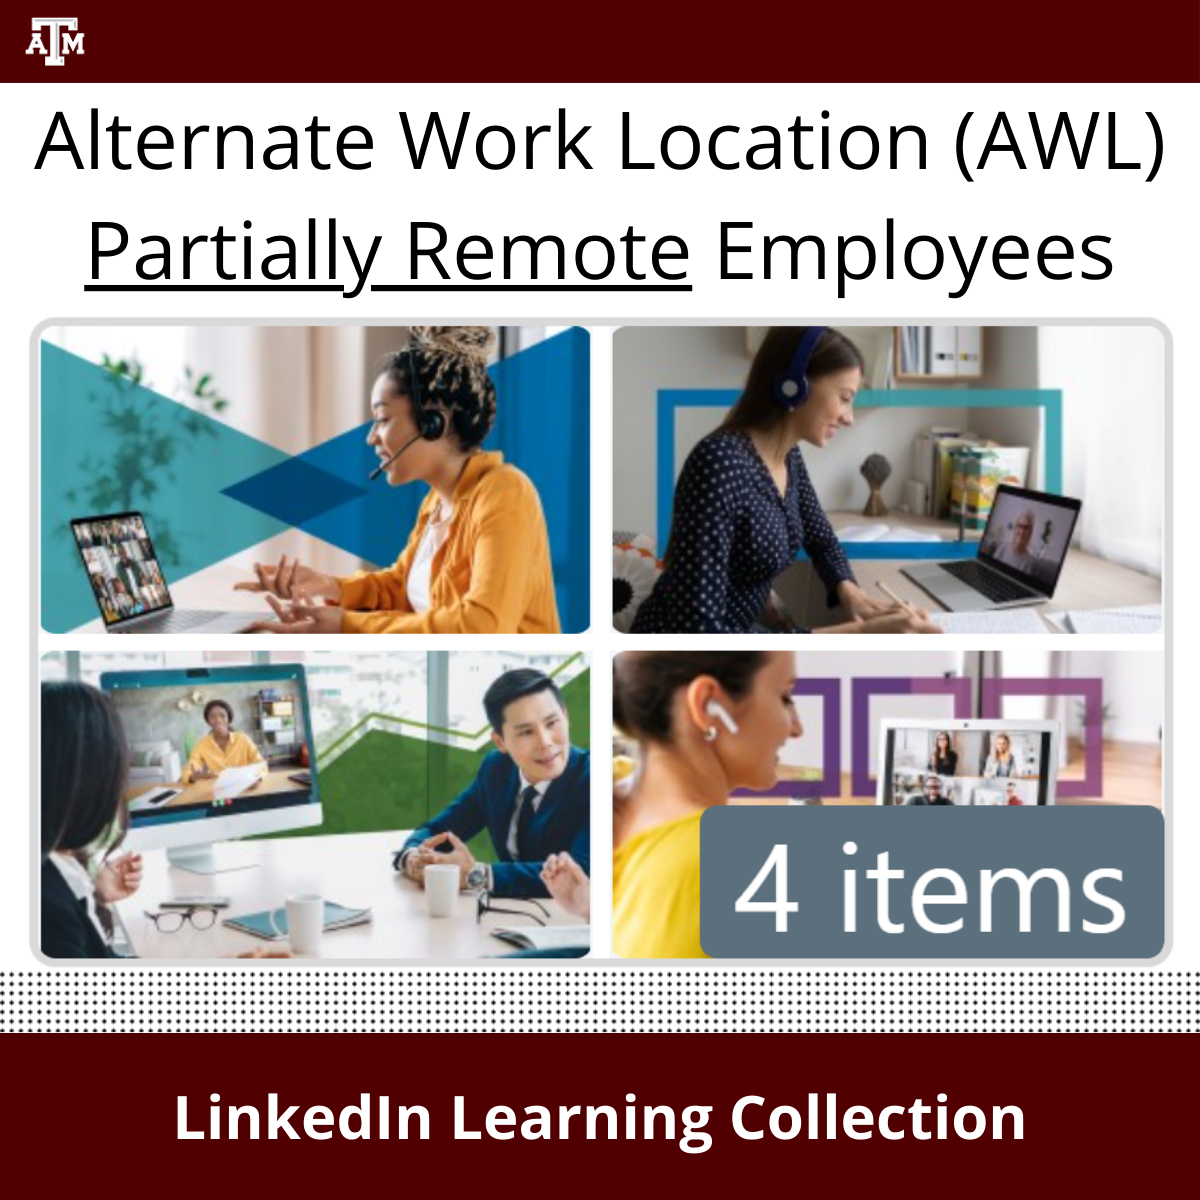 LinkedIn Learning Collection: AWL Partial Remote